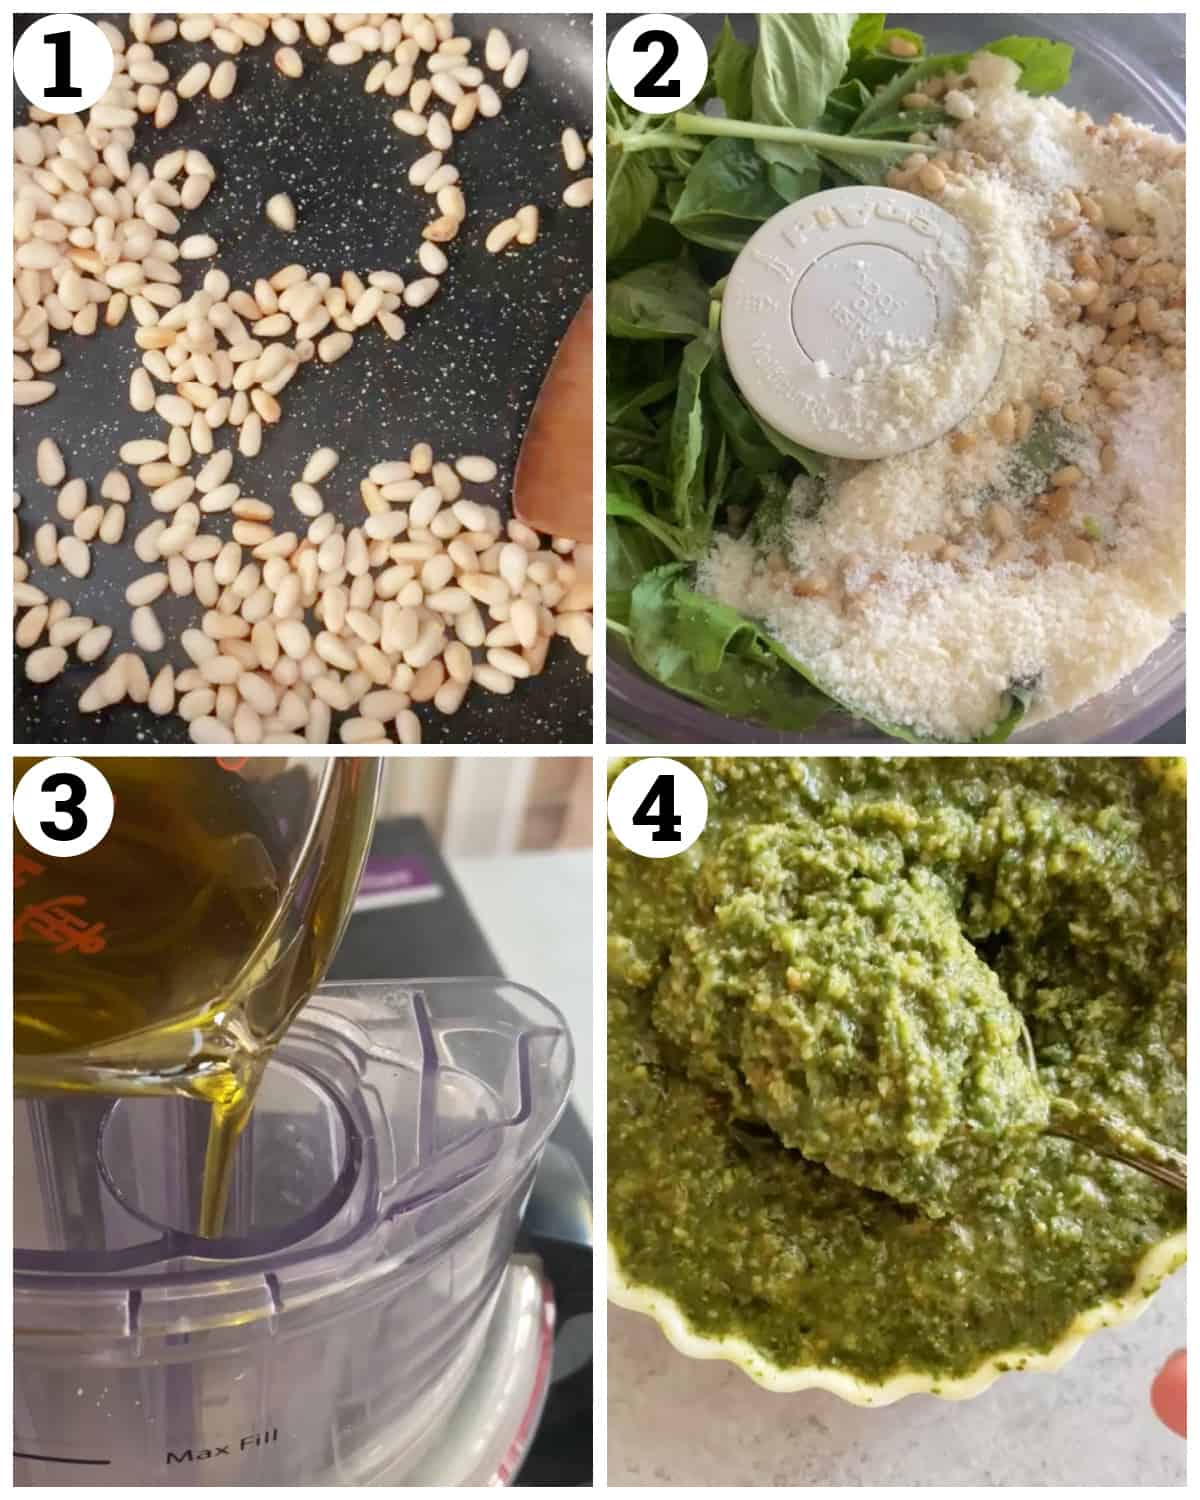 Toast the pine nuts, place in the food processor with basil, parmesan, salt and garlic. Add the olive oil and blend. 